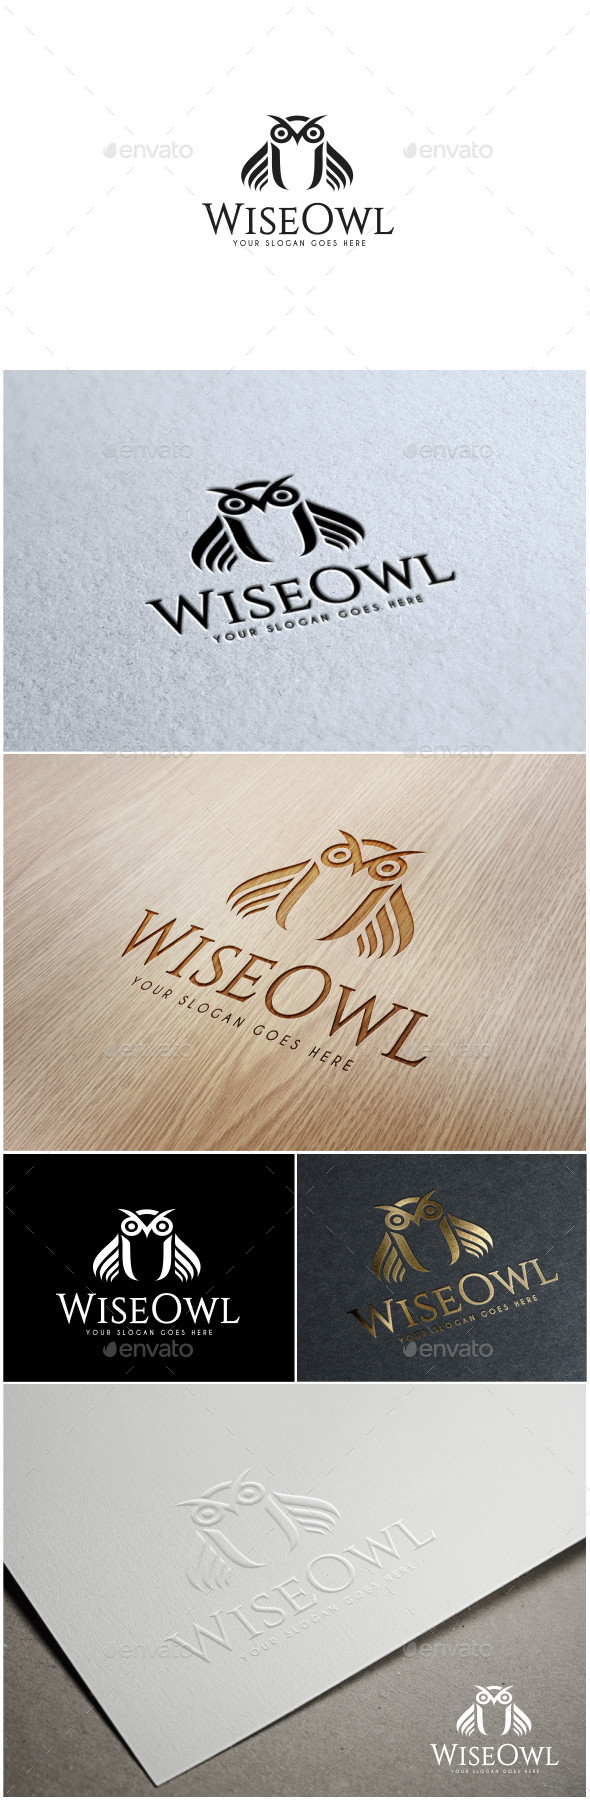 Image 20preview 20wise 20owl 20logo